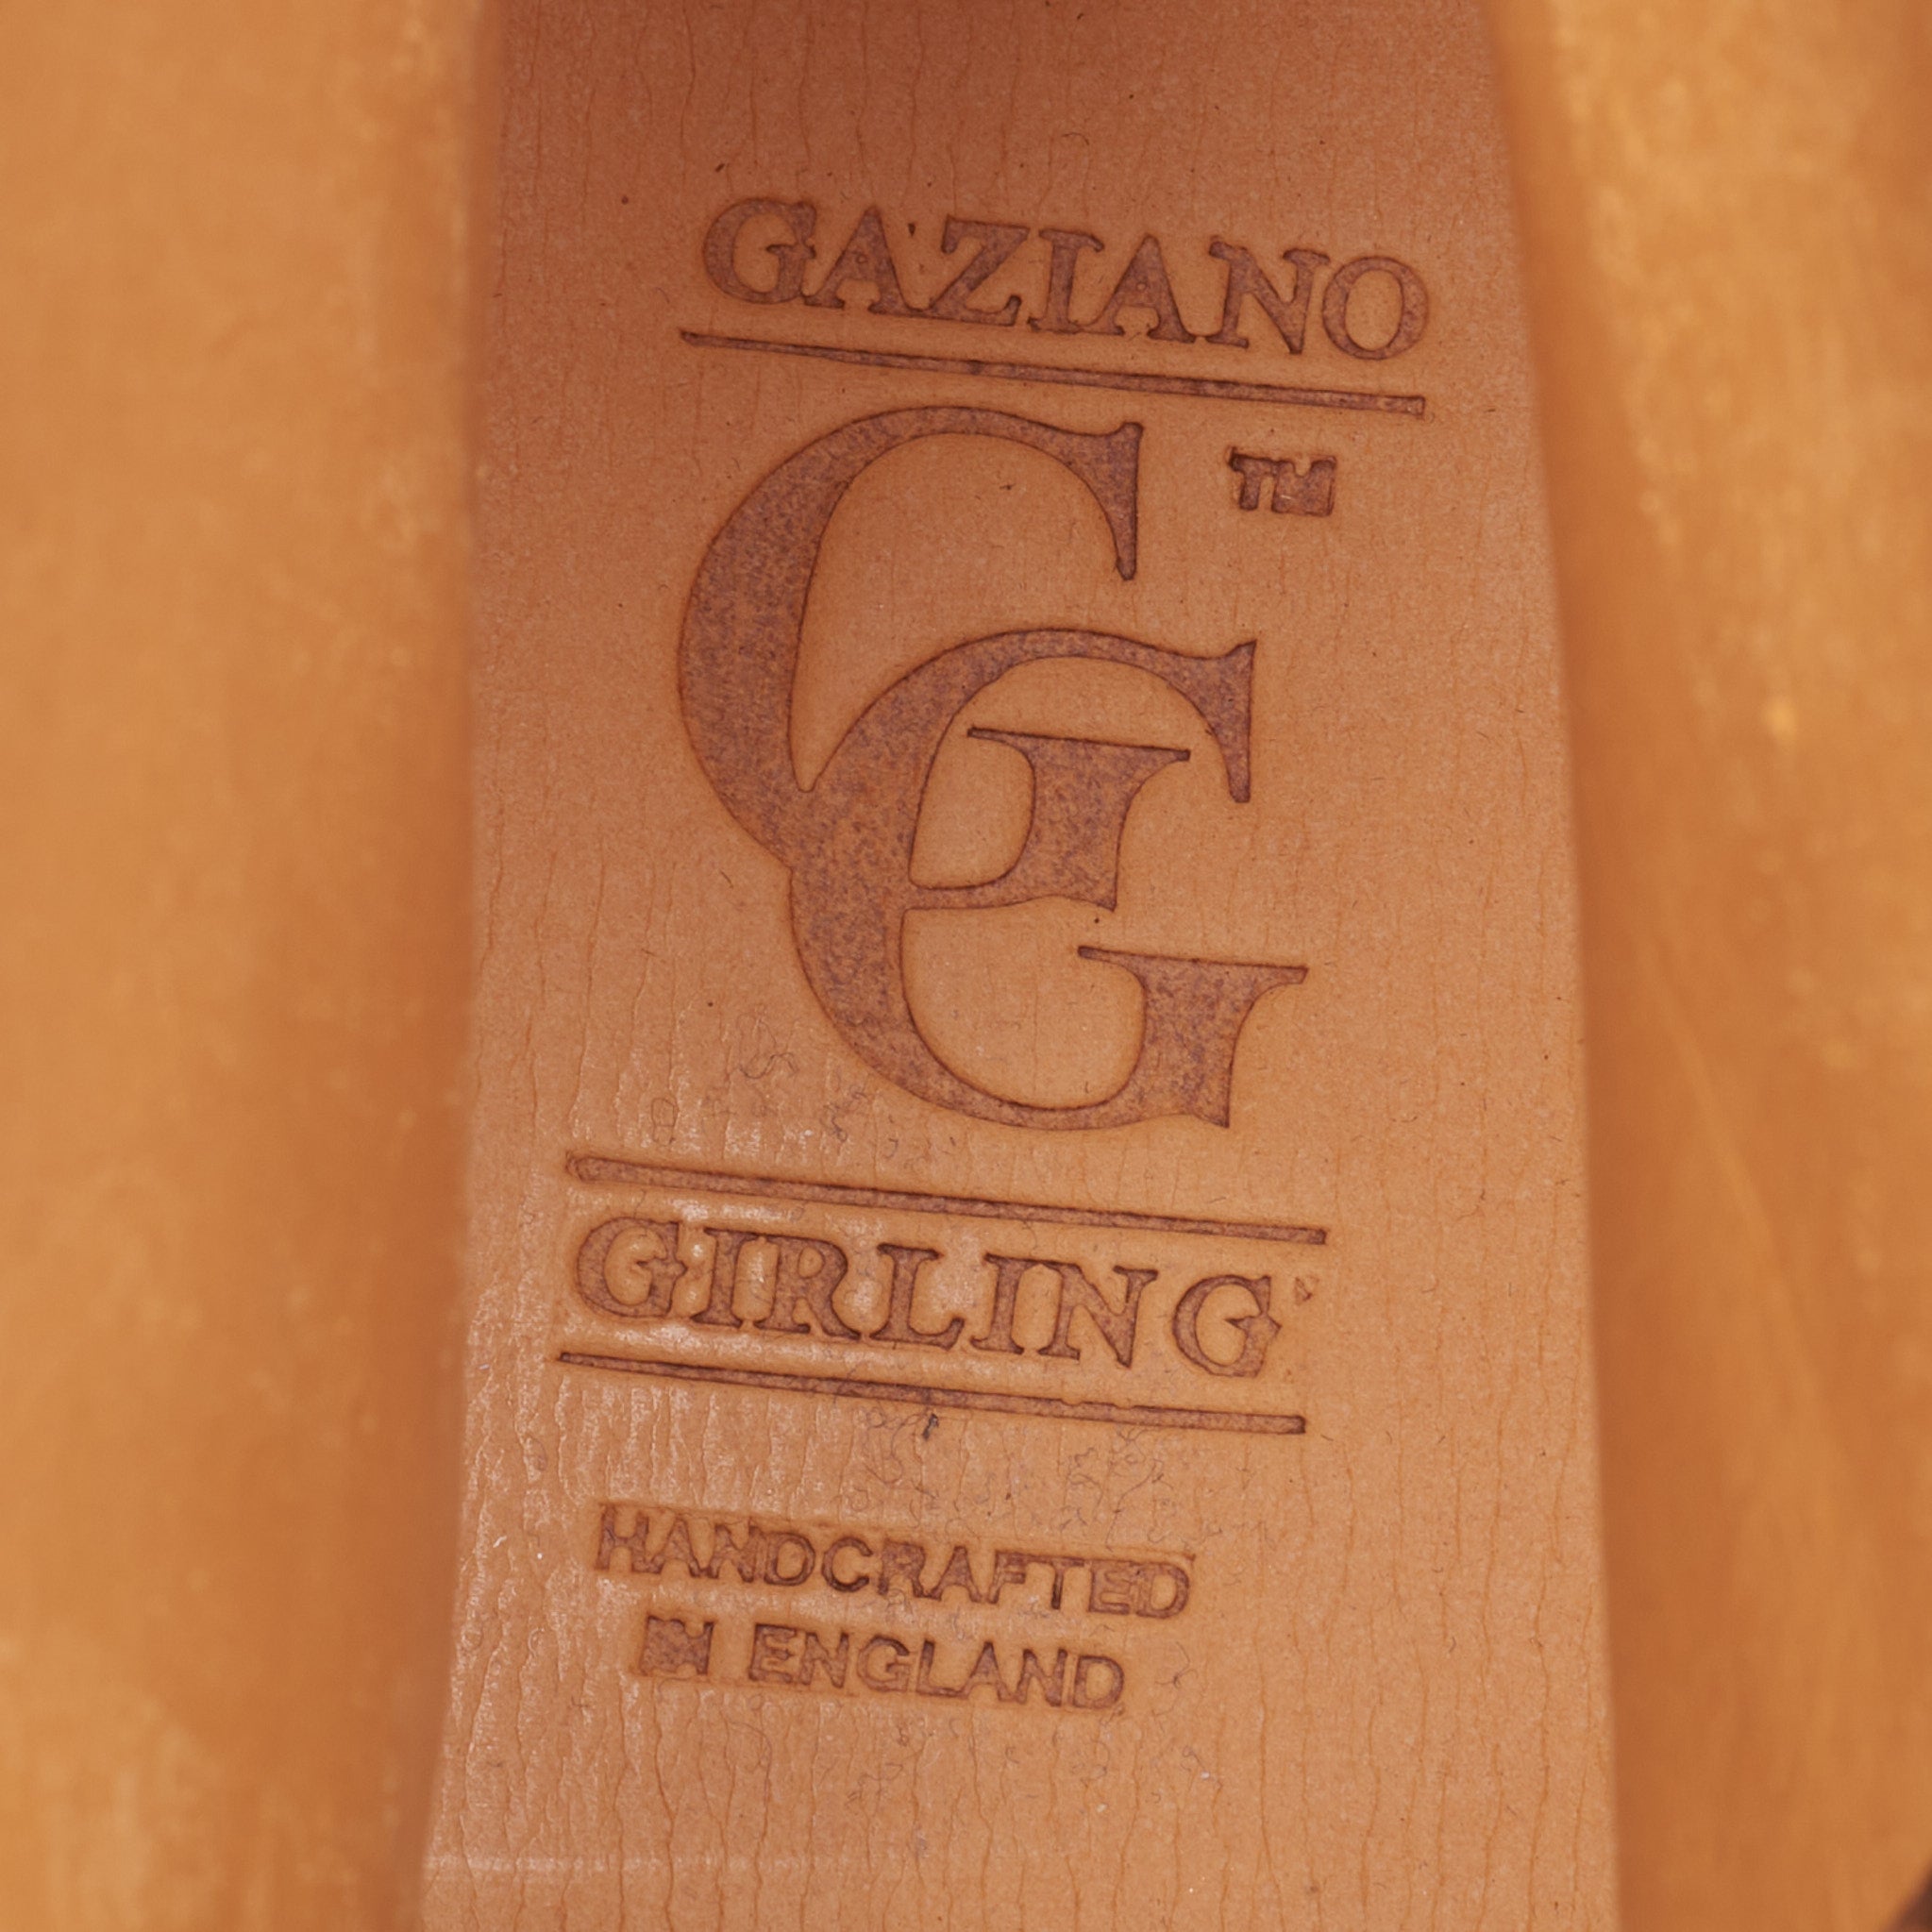 GAZIANO & GIRLING "Lamport" Chestnut Leather Boots UK 8E NEW US 8.5 Last MH71 GAZIANO & GIRLING